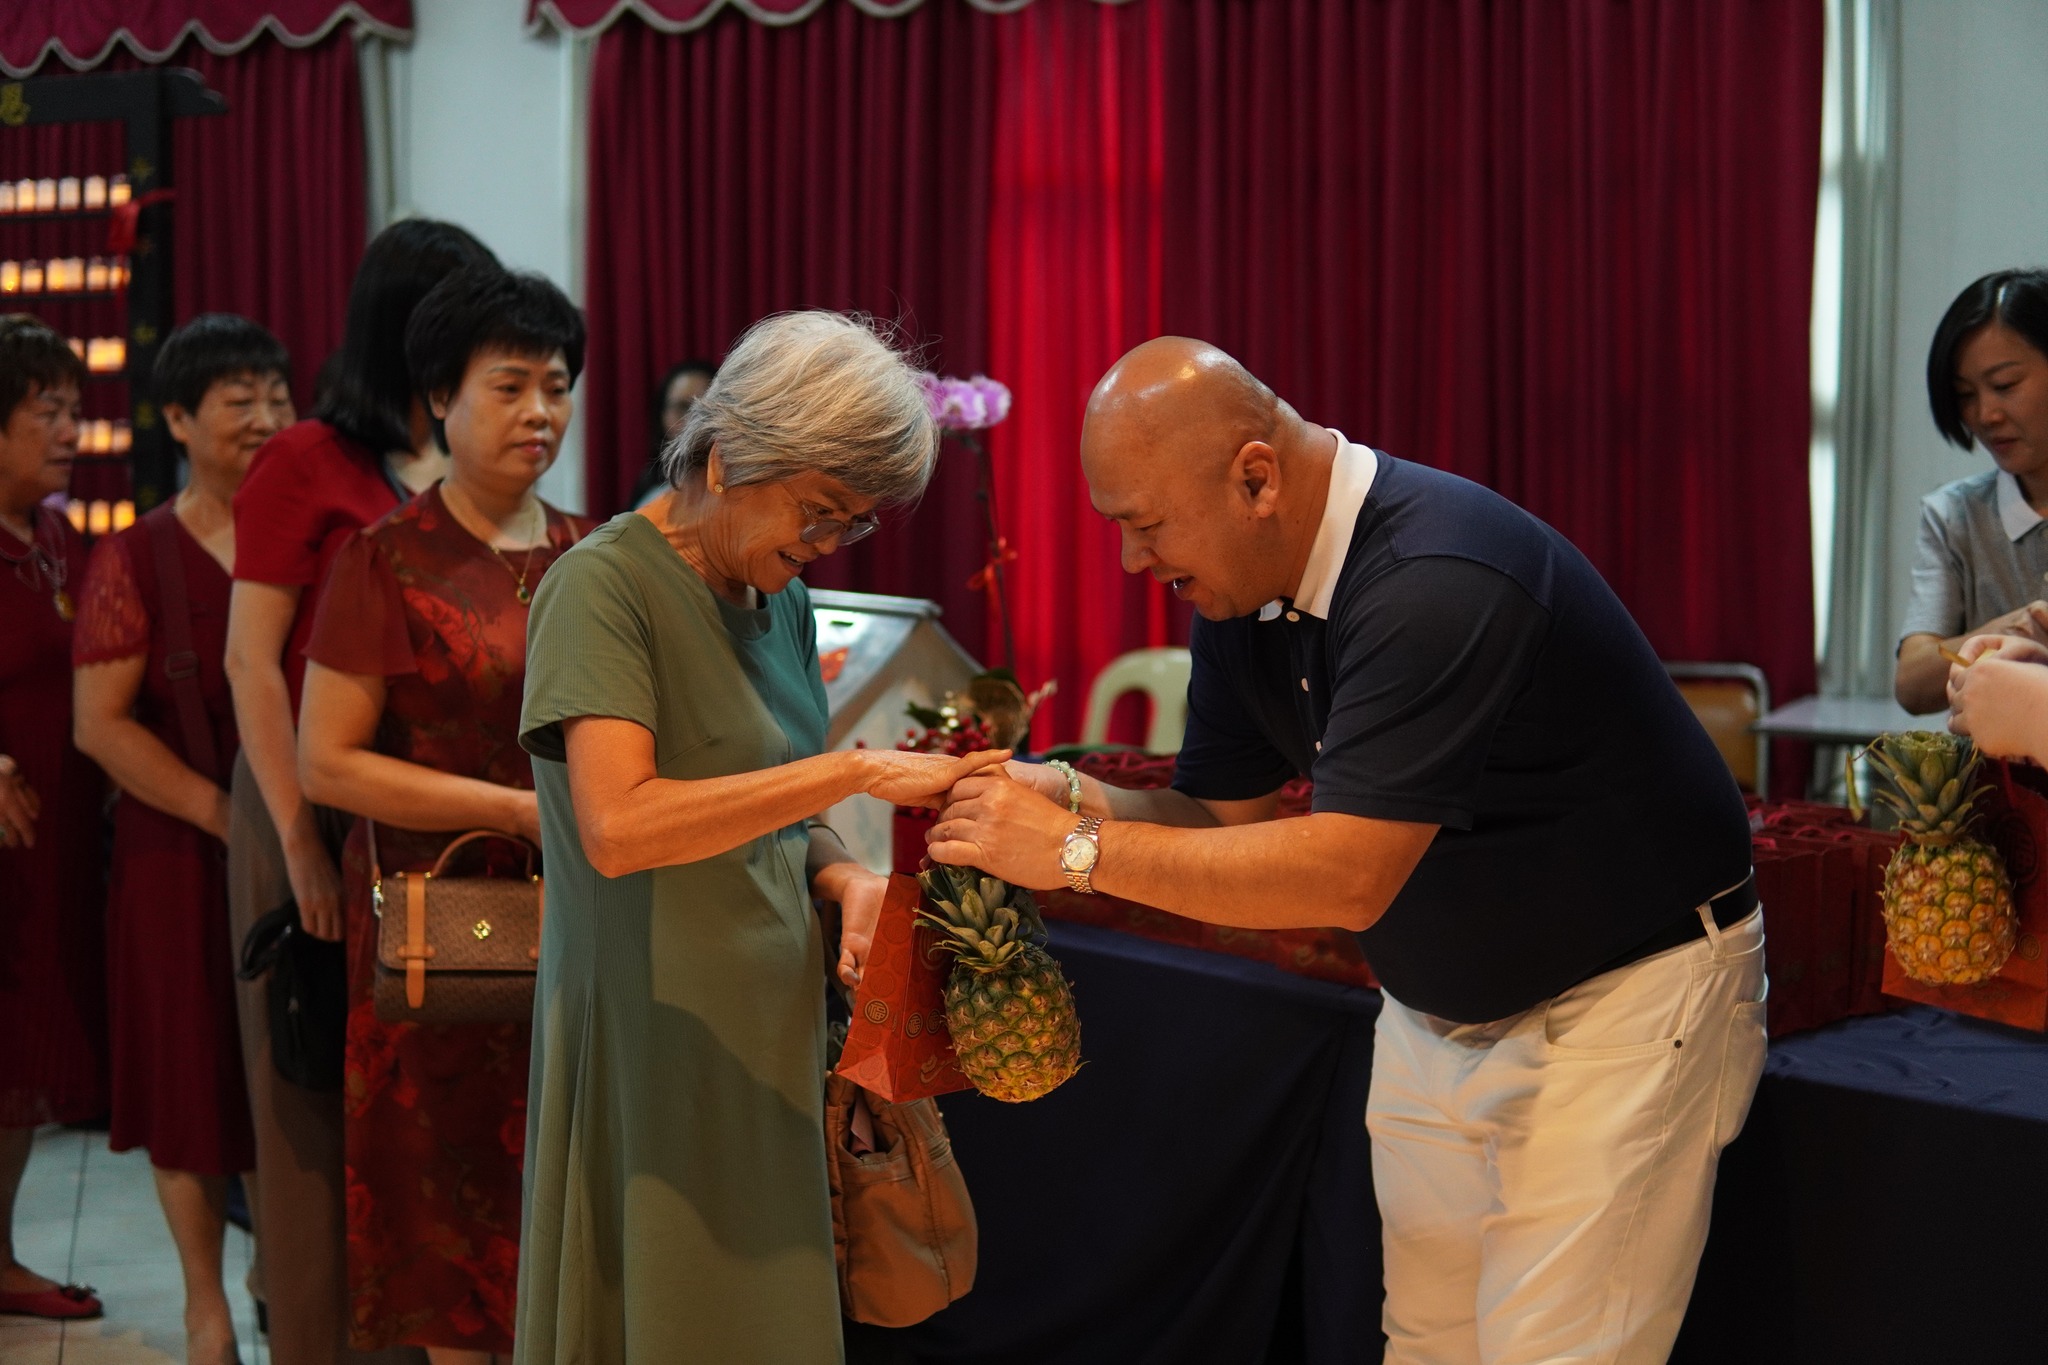 Tzu Chi Commissioner, Bro. Scott Wu assisted in the distribution of gifts to all the attendees.【Photo by Tzu Chi Davao】